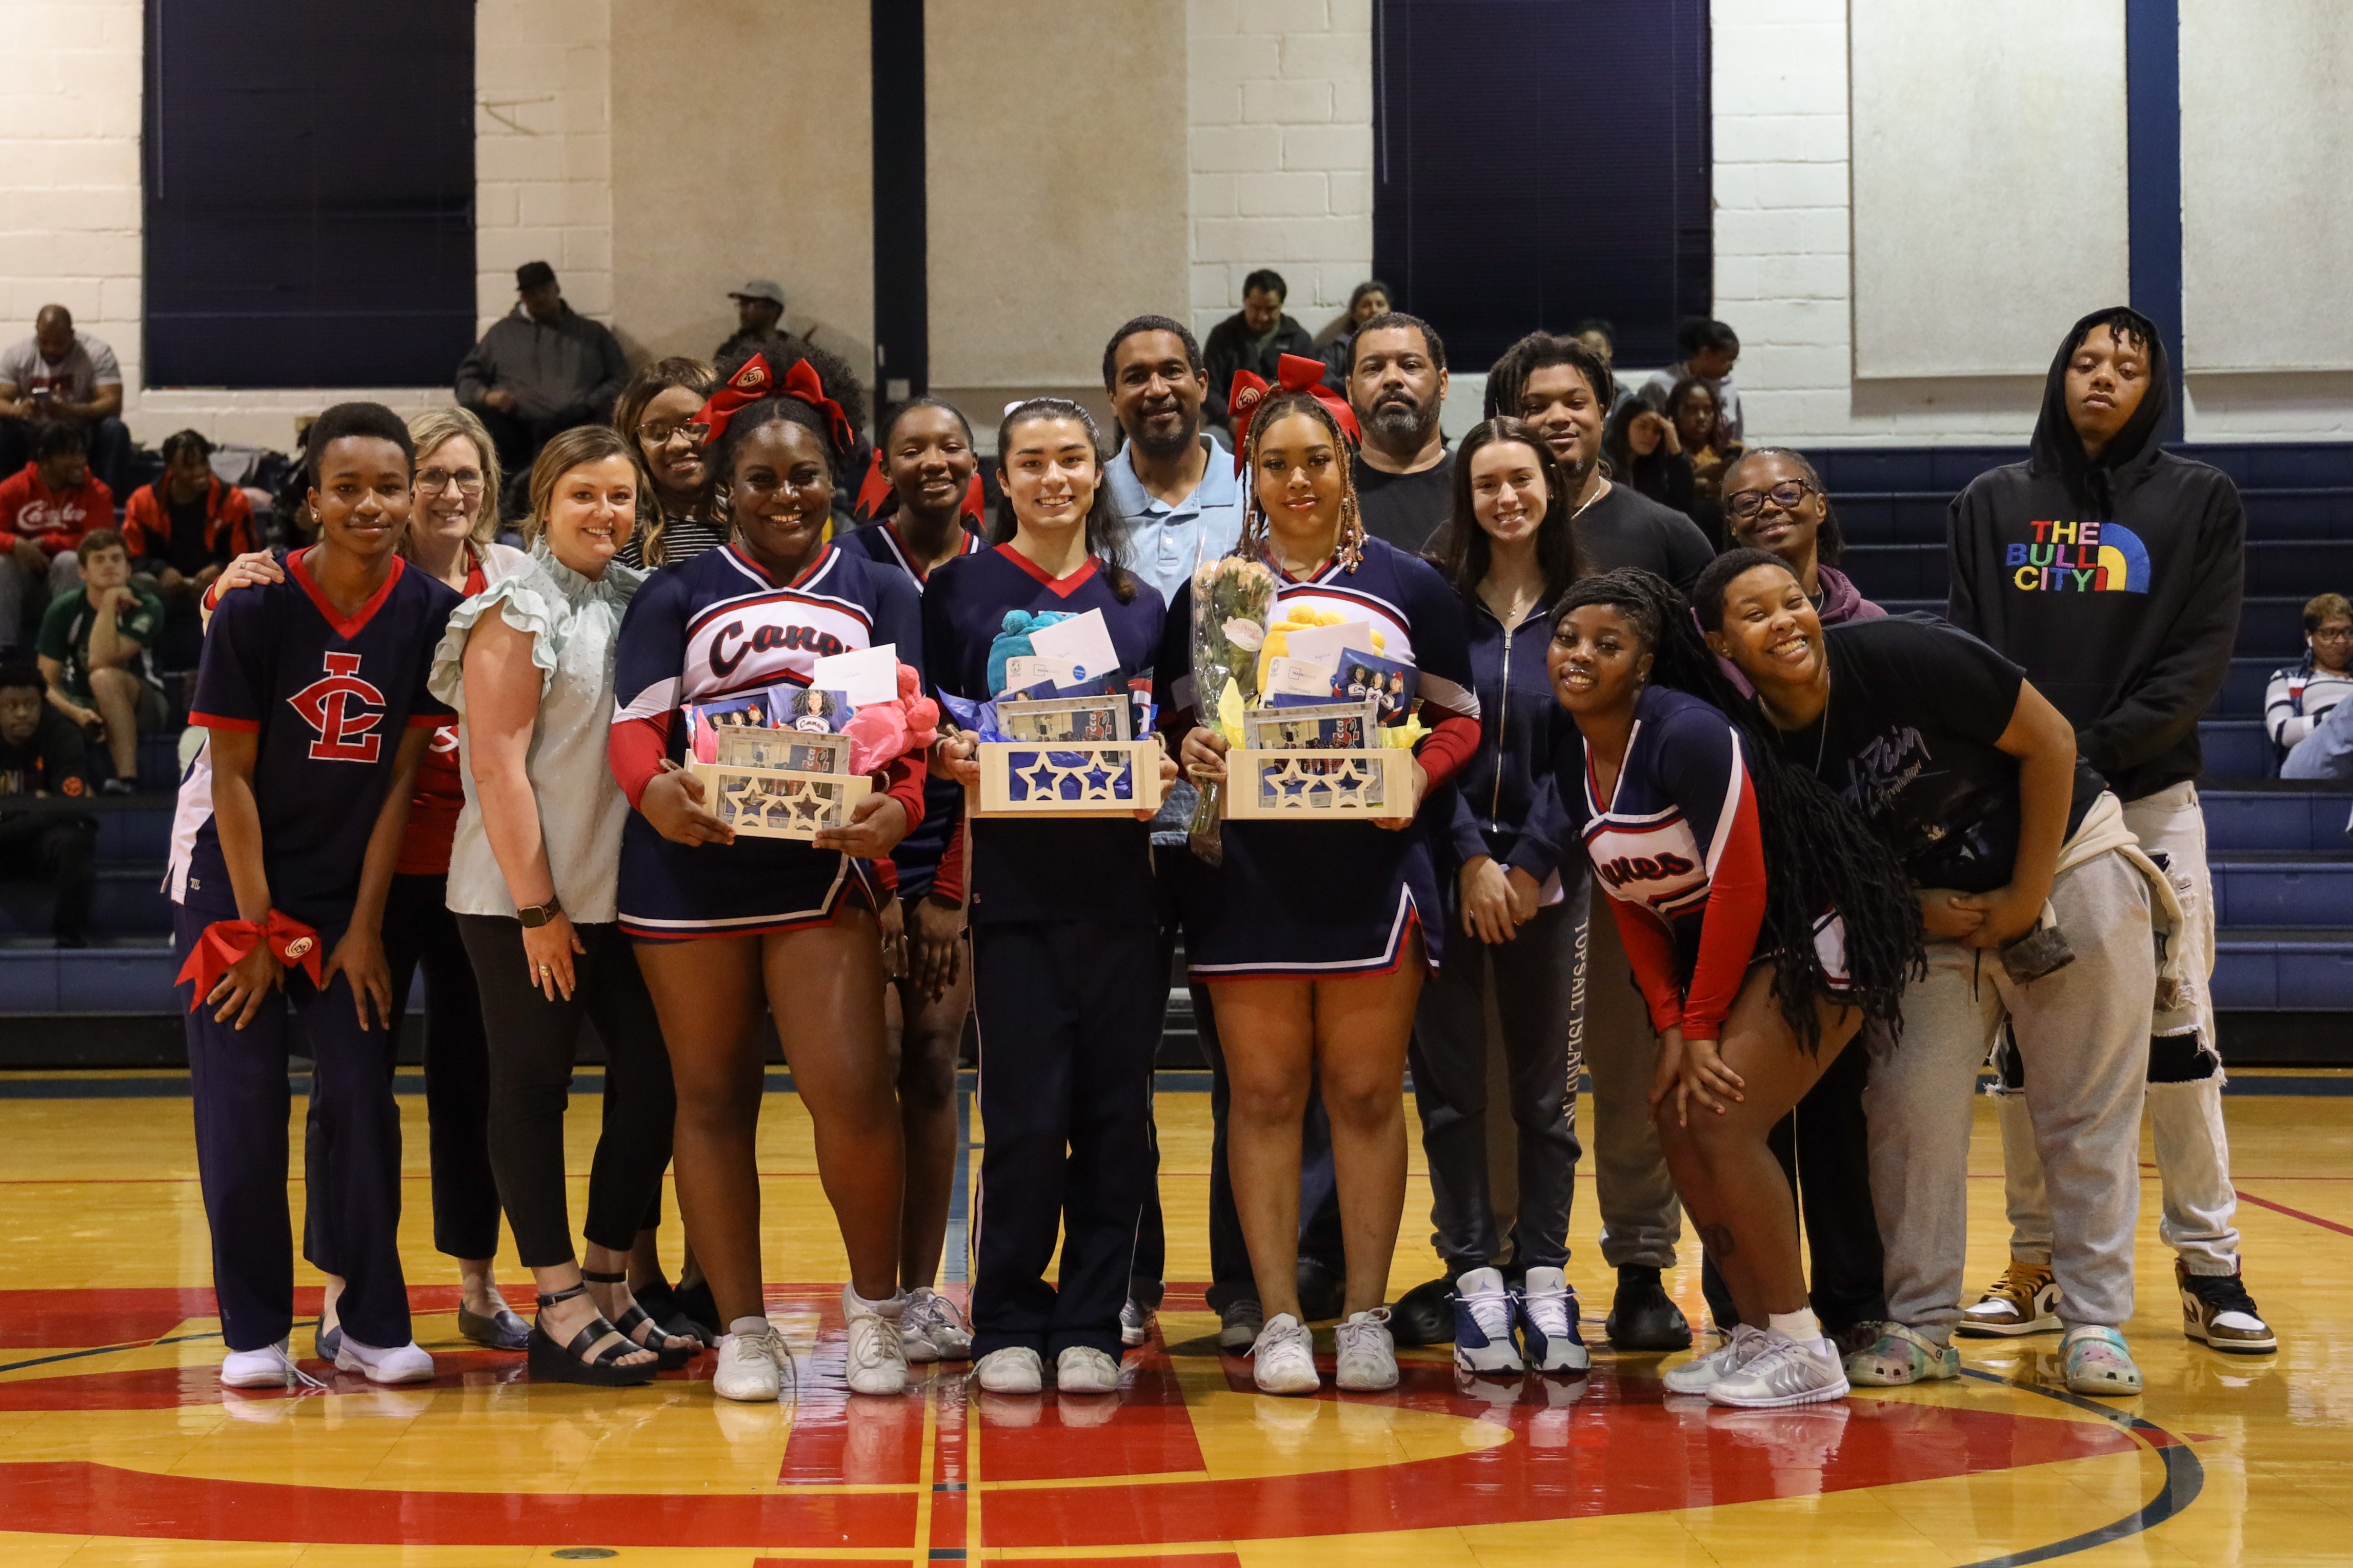 Louisburg College Cheer sophomores with friends and family.